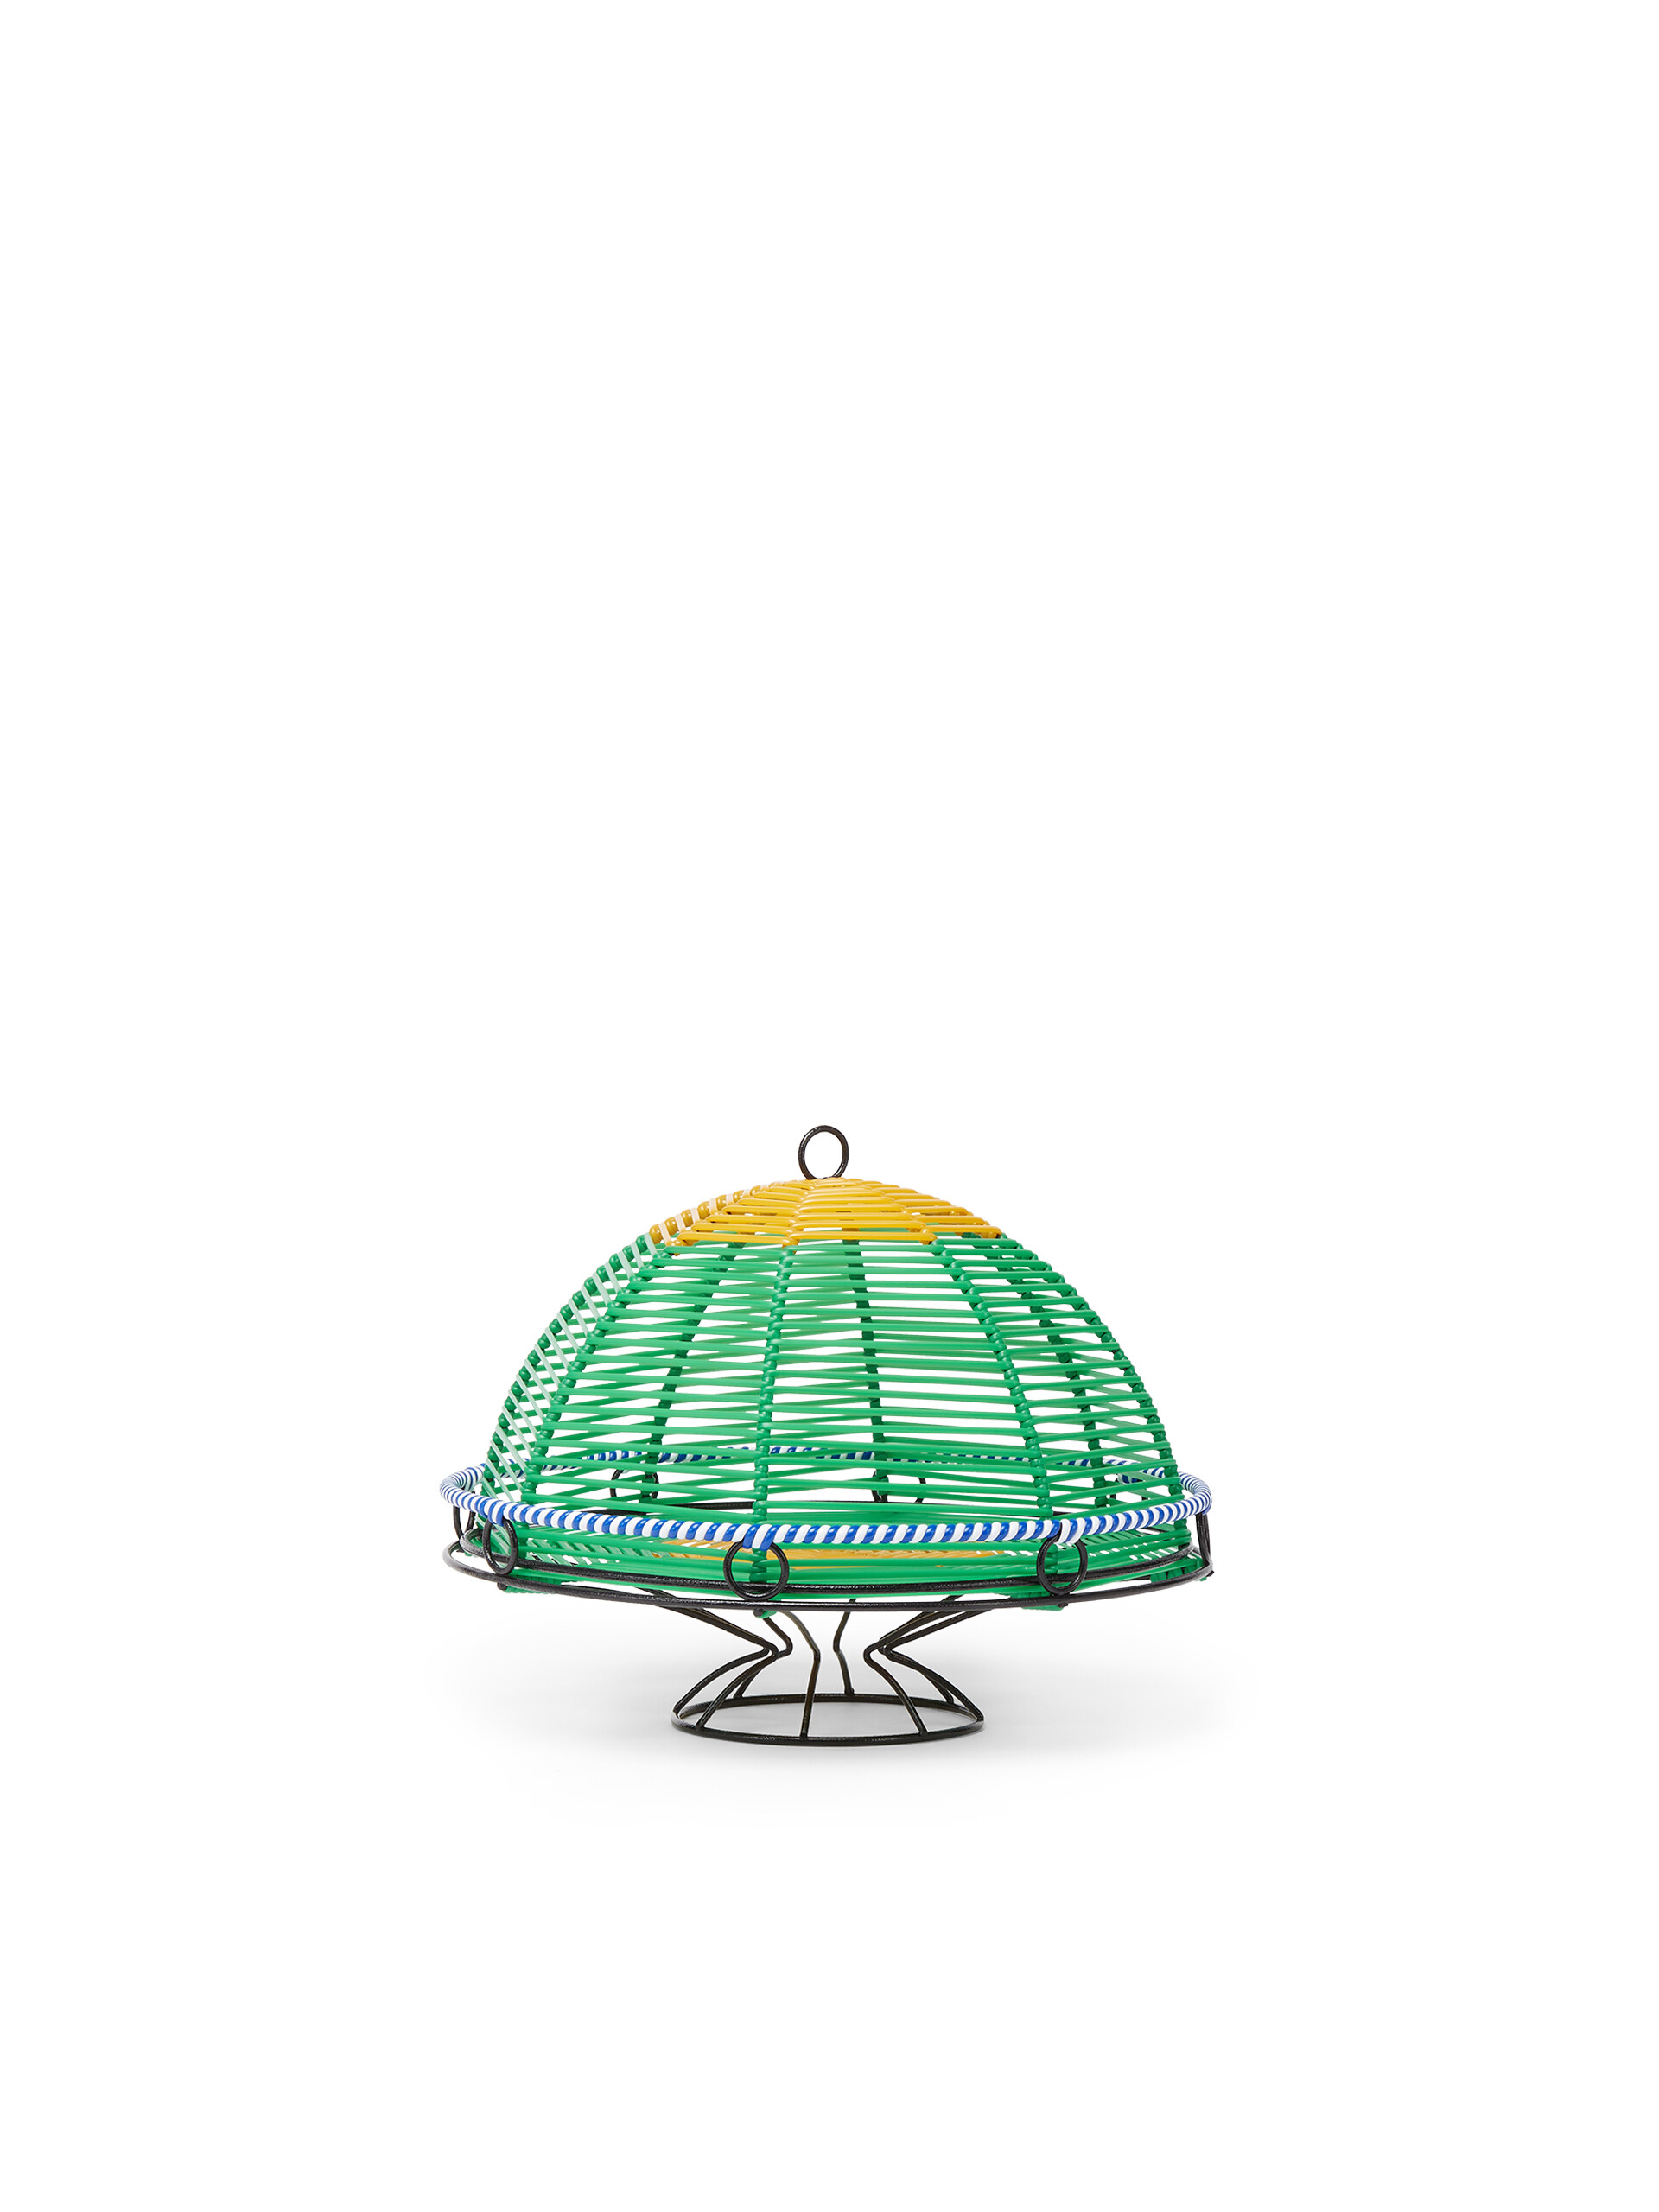 MARNI MARKET cake stand in metal and green PVC - Home Accessories - Image 2